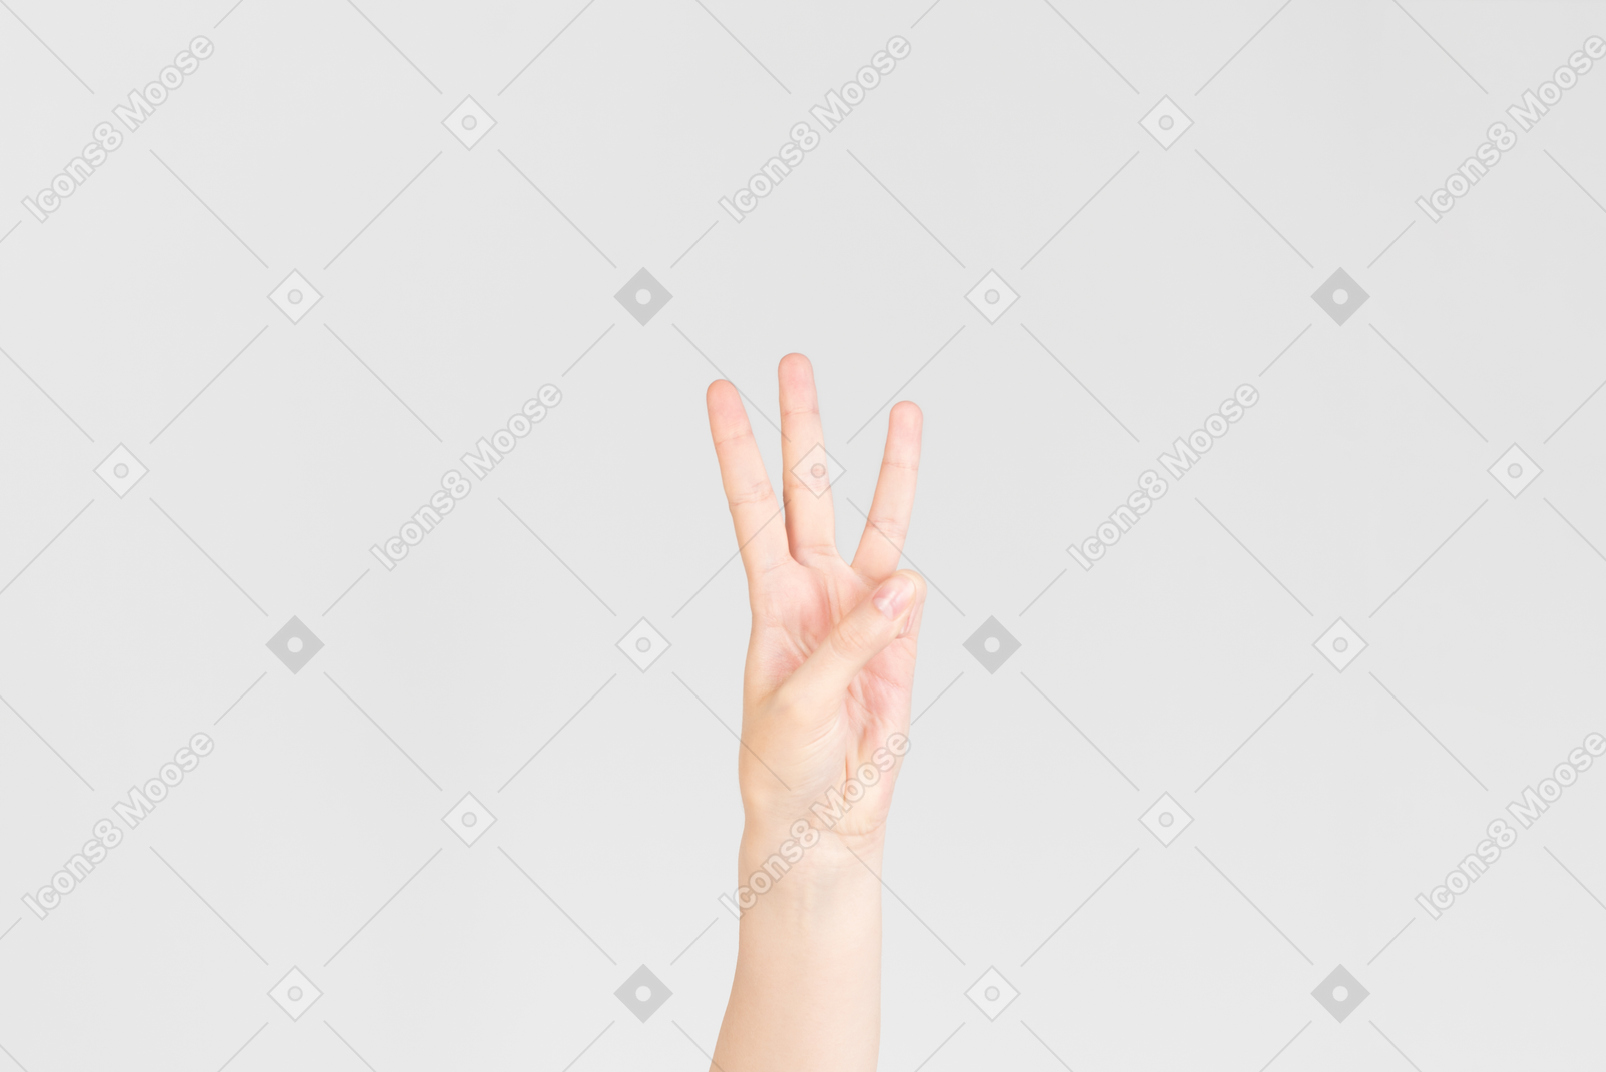 Female hand showing three fingers